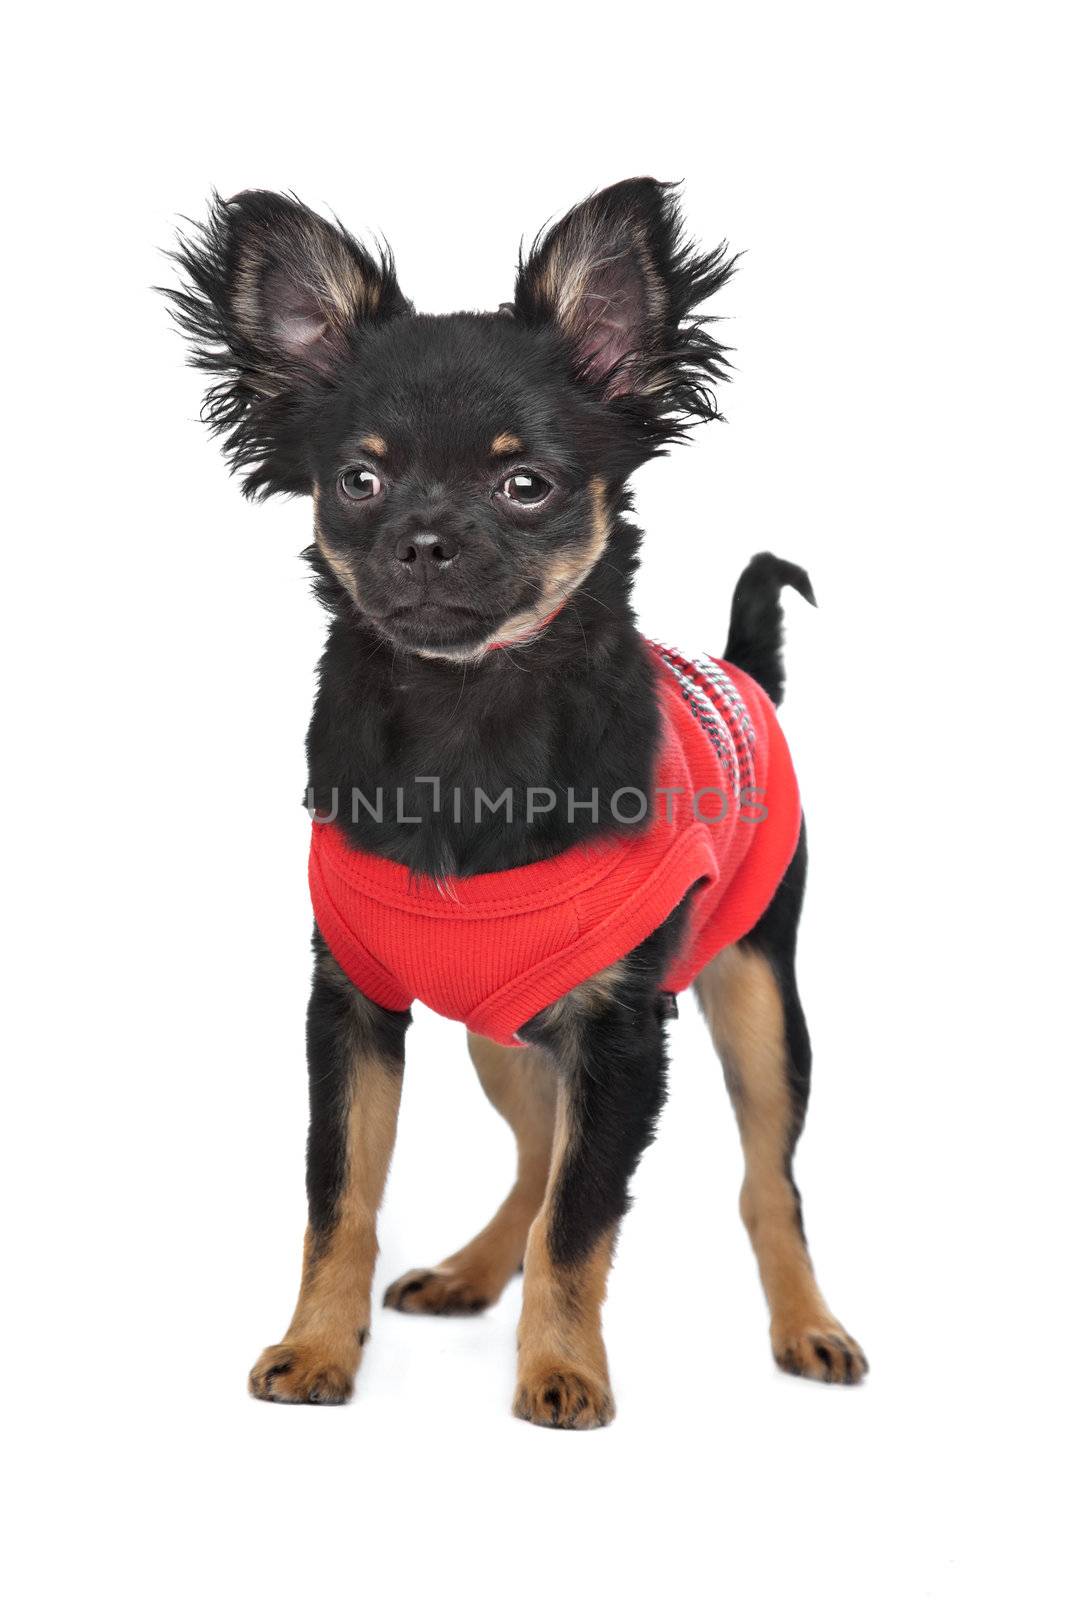 chihuahua with red shirt by eriklam